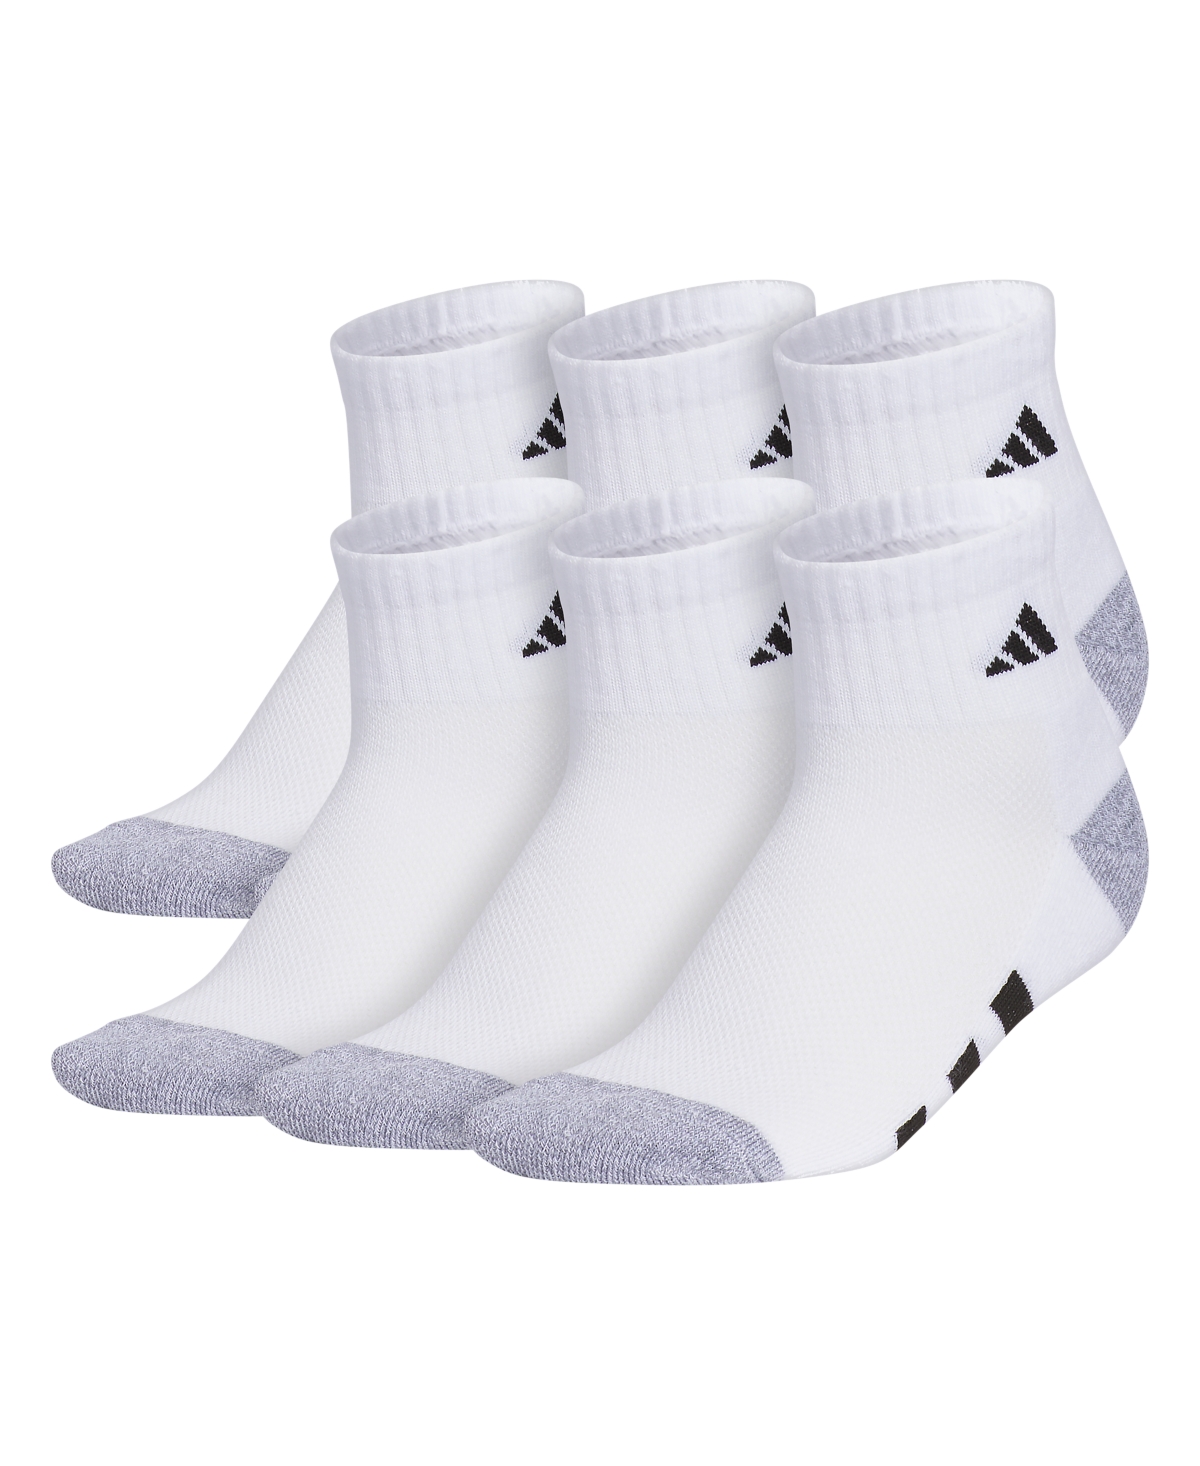 Shop Adidas Originals Boys Youth Athletic Cushioned Quarter Socks, Pack Of 6 In White